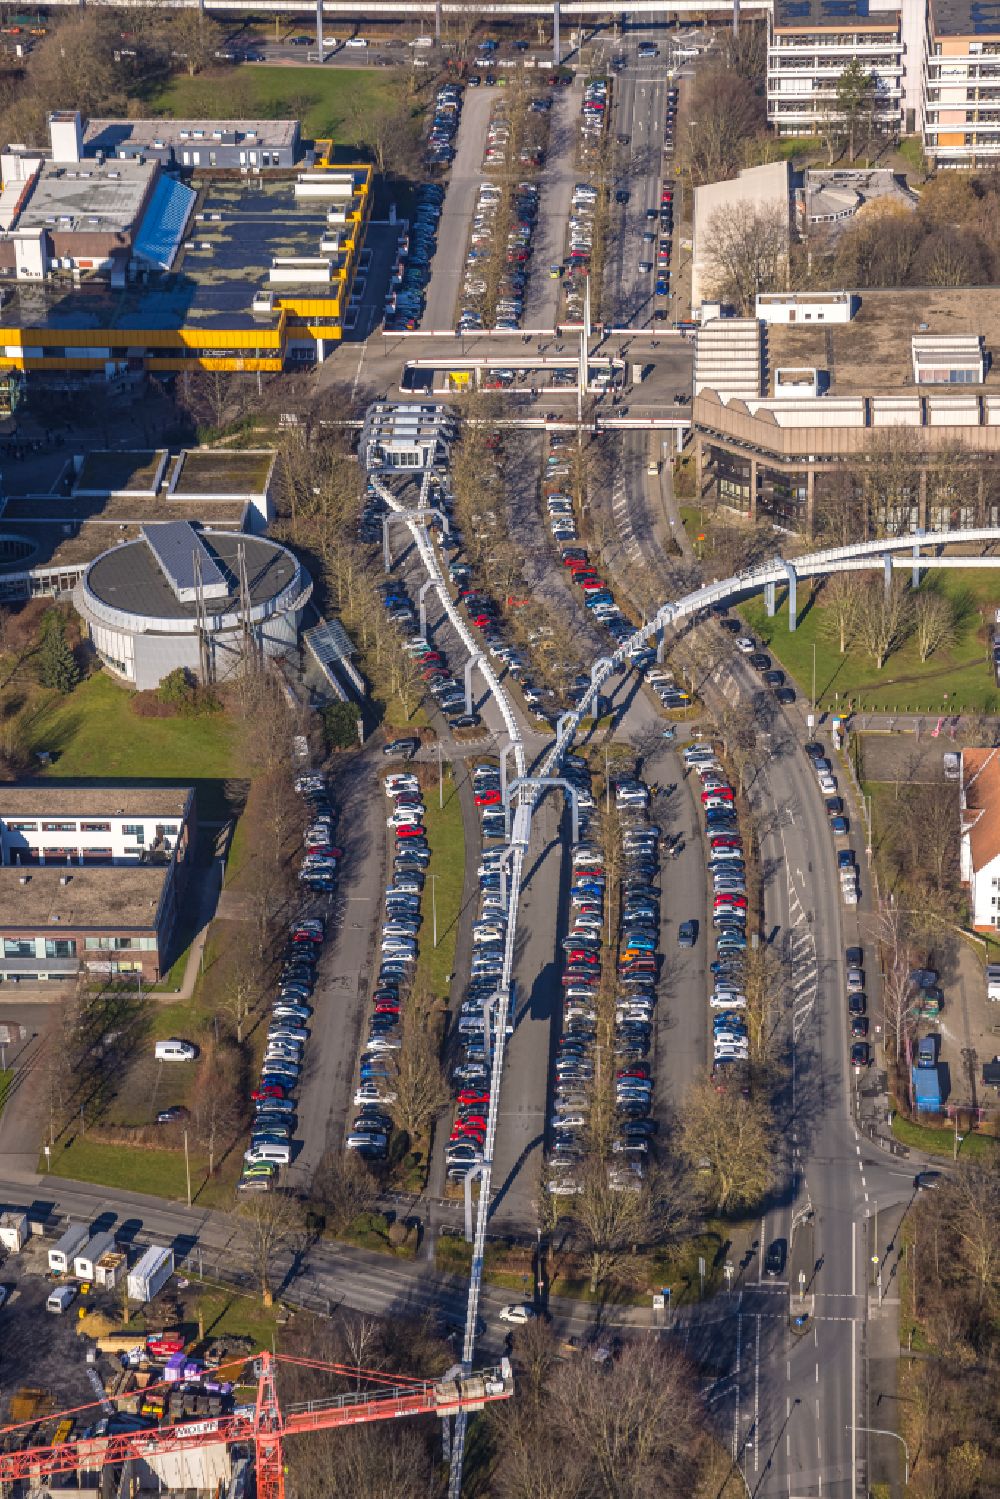 Aerial photograph Dortmund - Route of the H-Bahn21 on Vogelpothsweg in the district of Barop in Dortmund in the Ruhr area in the state of North Rhine-Westphalia, Germany